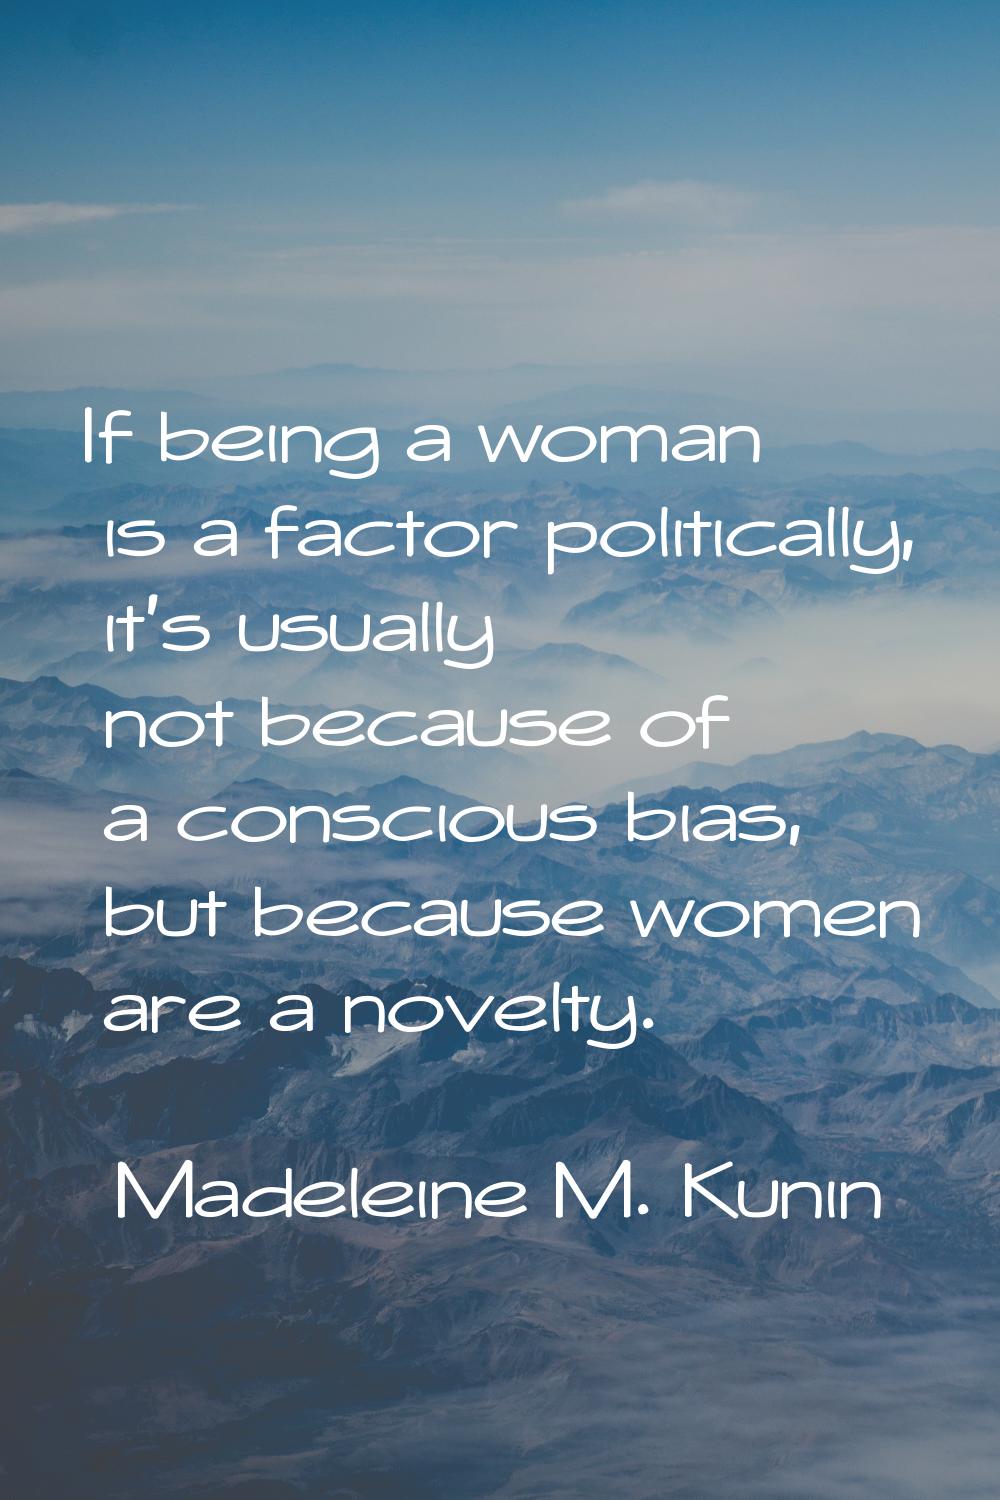 If being a woman is a factor politically, it's usually not because of a conscious bias, but because